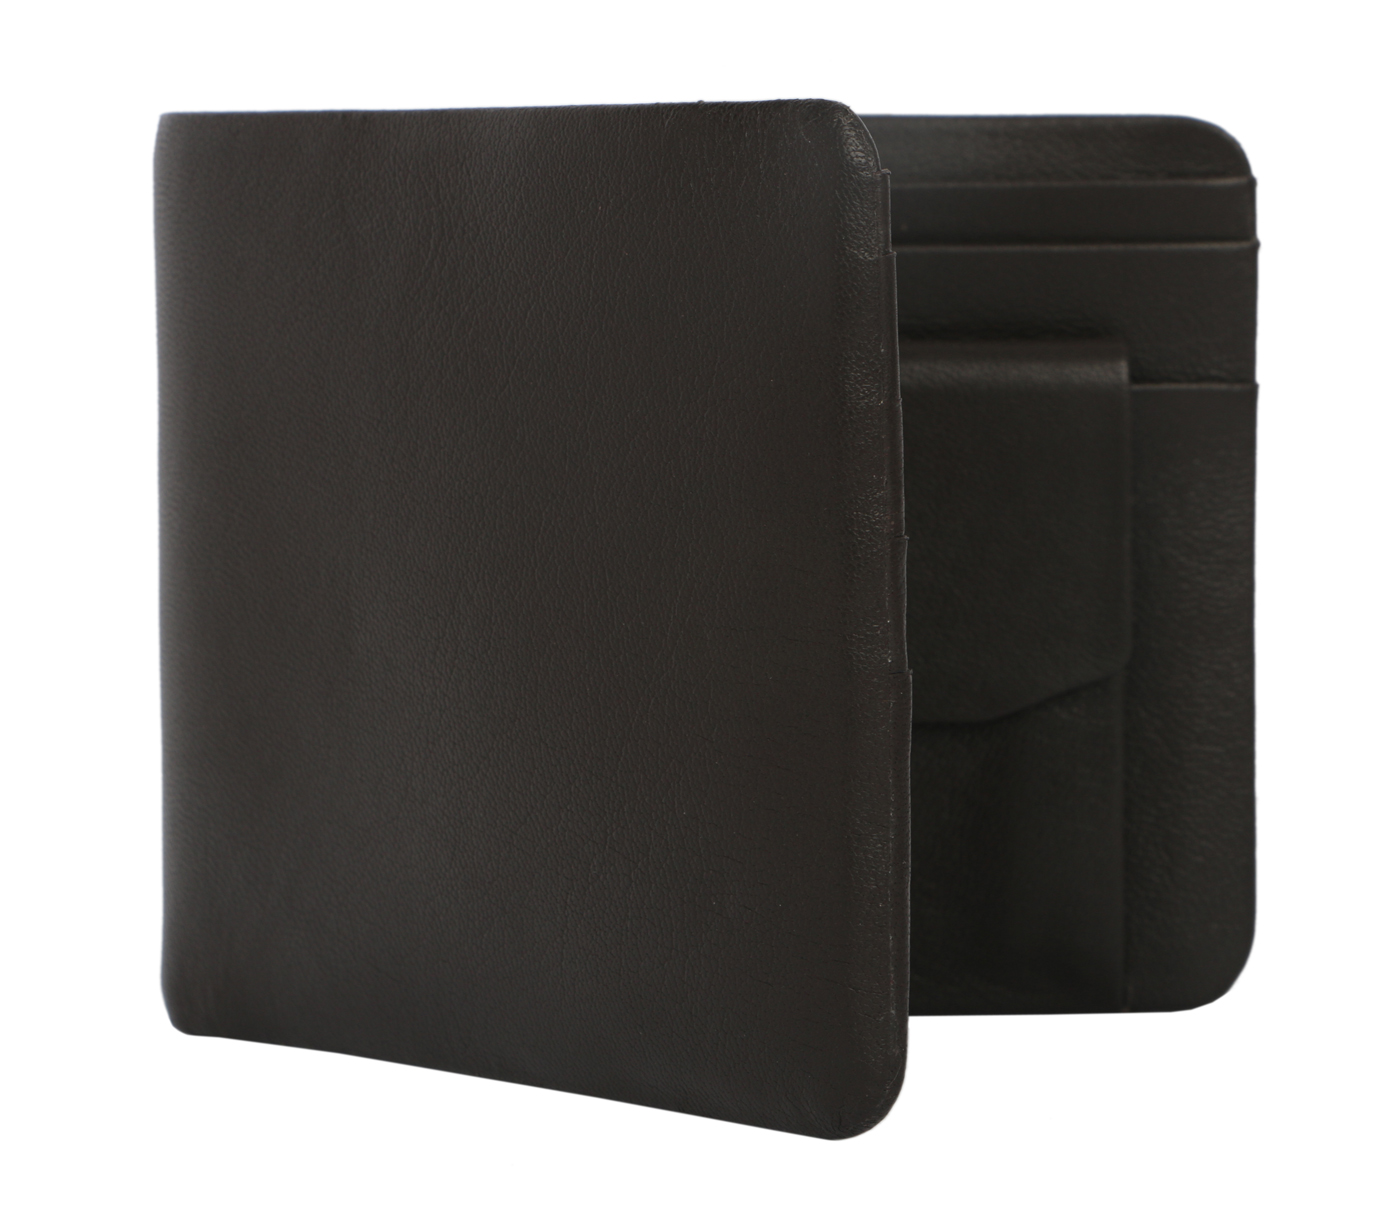 VW1-Ashton-Men's bifold wallet with coin pocket in Genuine Leather - Brown